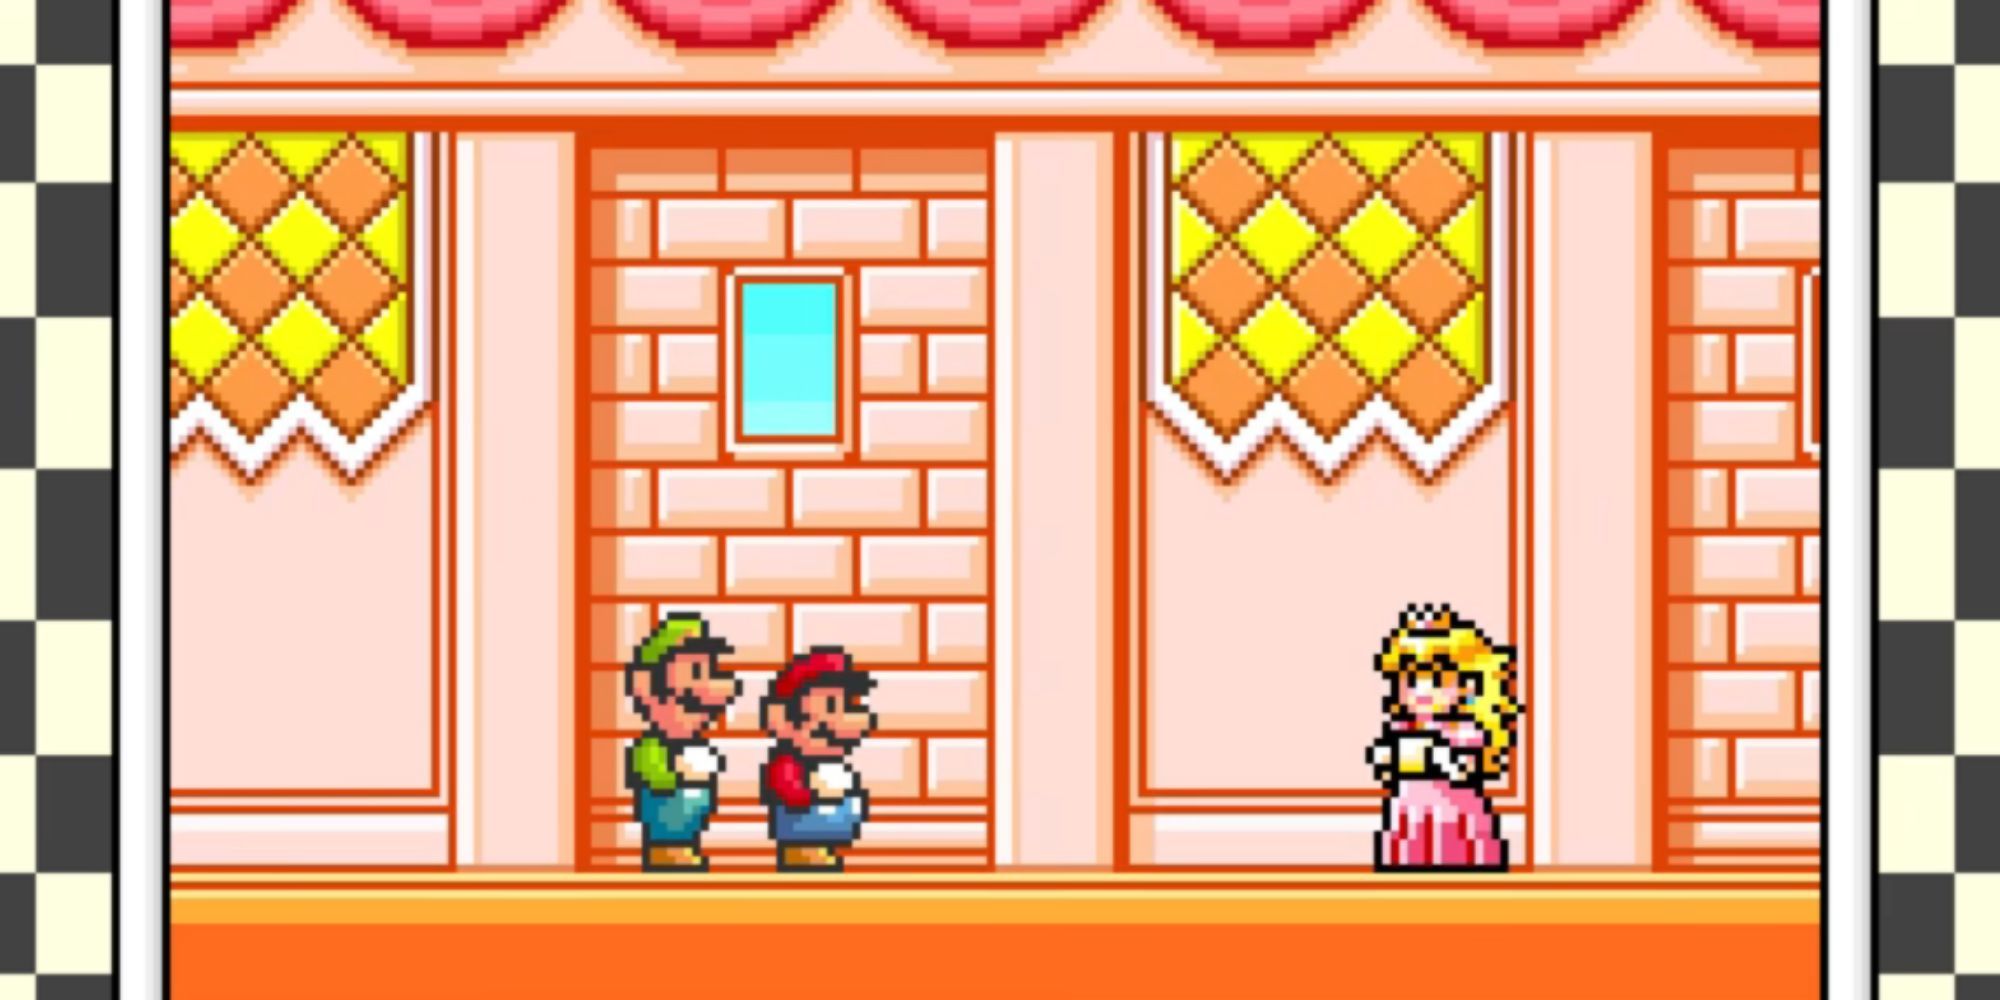 Peach reads a letter to Mario and Luigi in her castle in Super Mario Advance 4